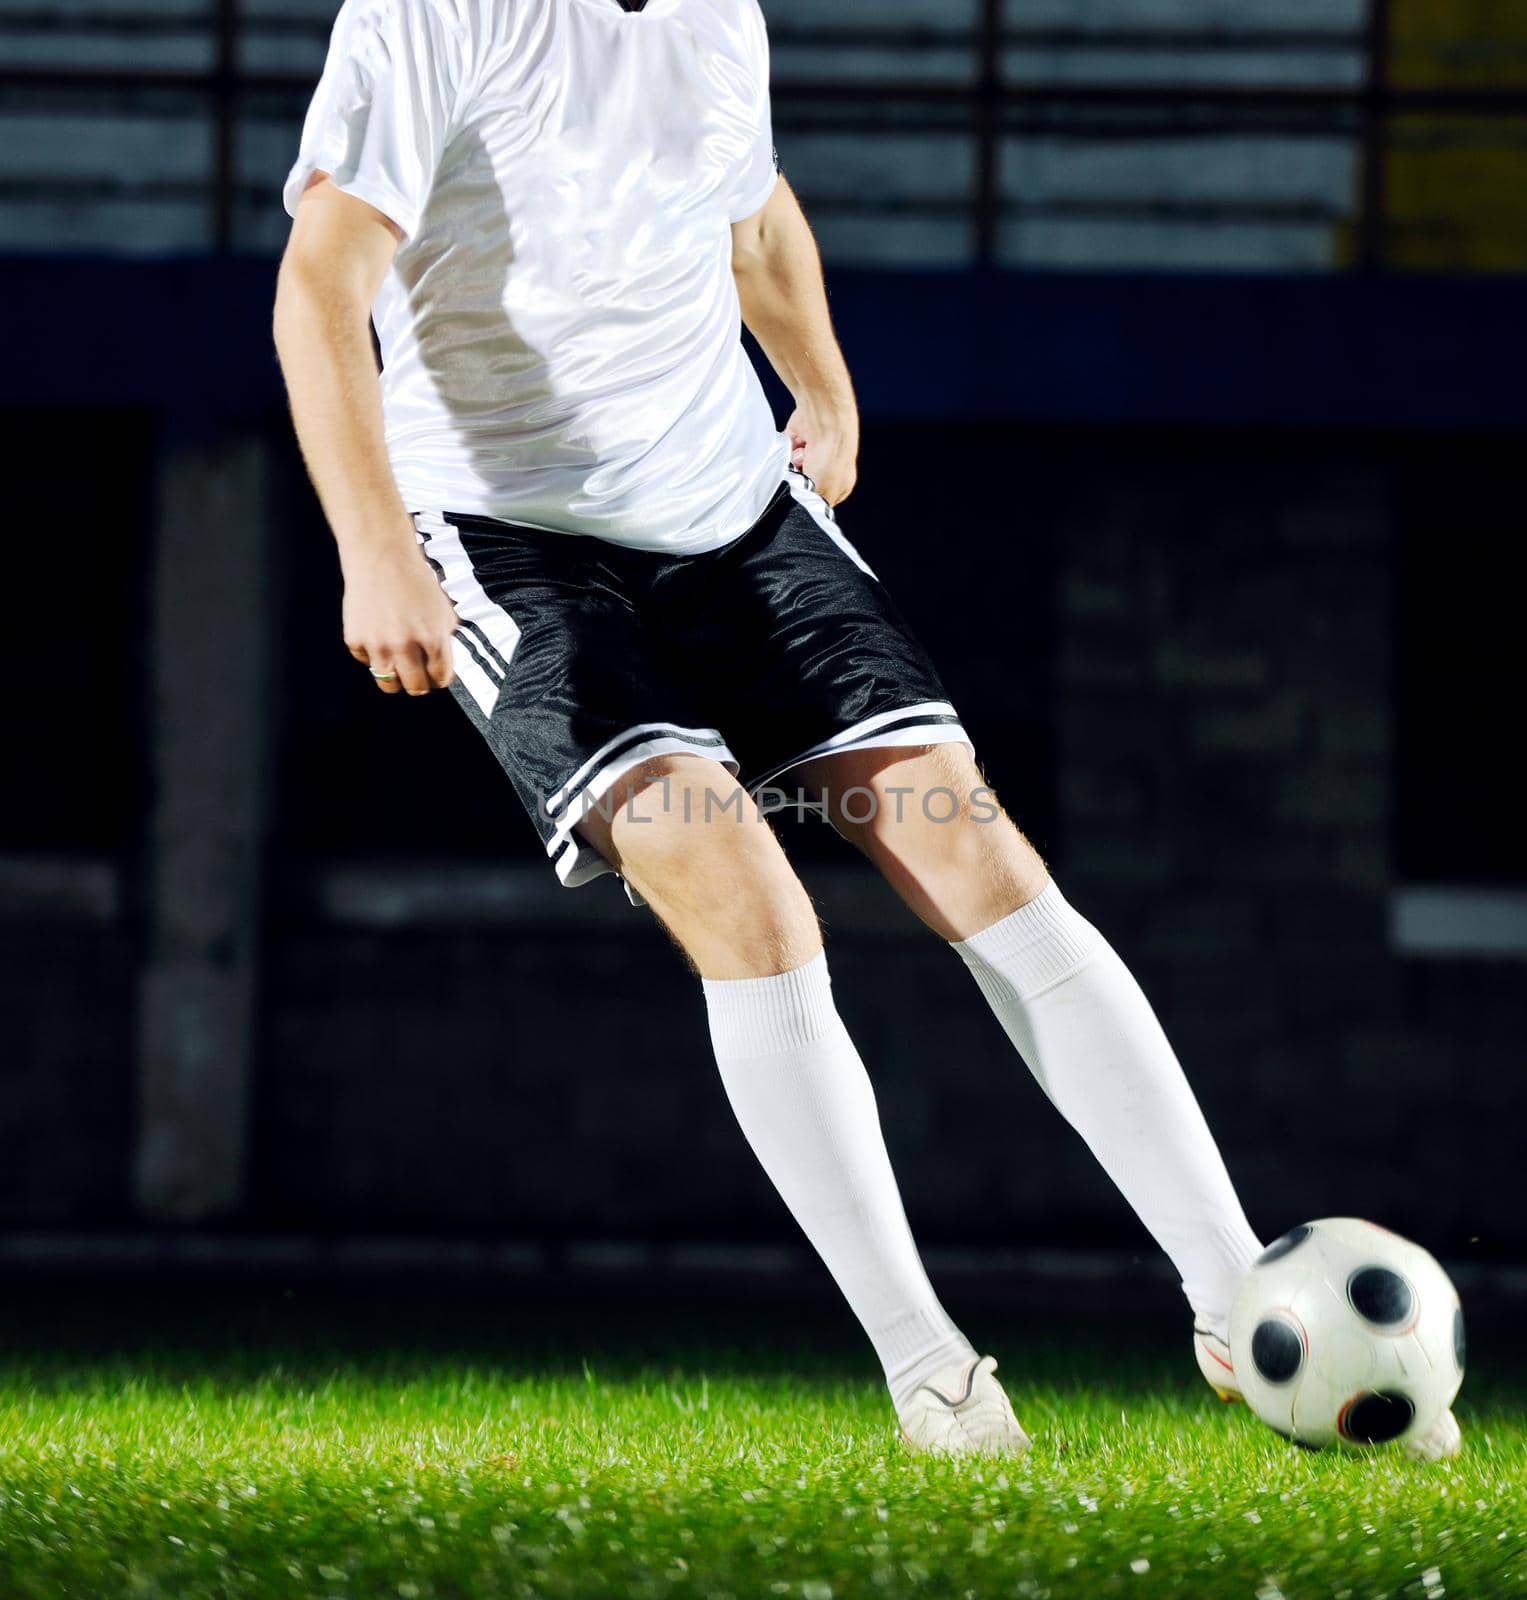 soccer player doing kick with ball on football stadium  field  isolated on black background  in night